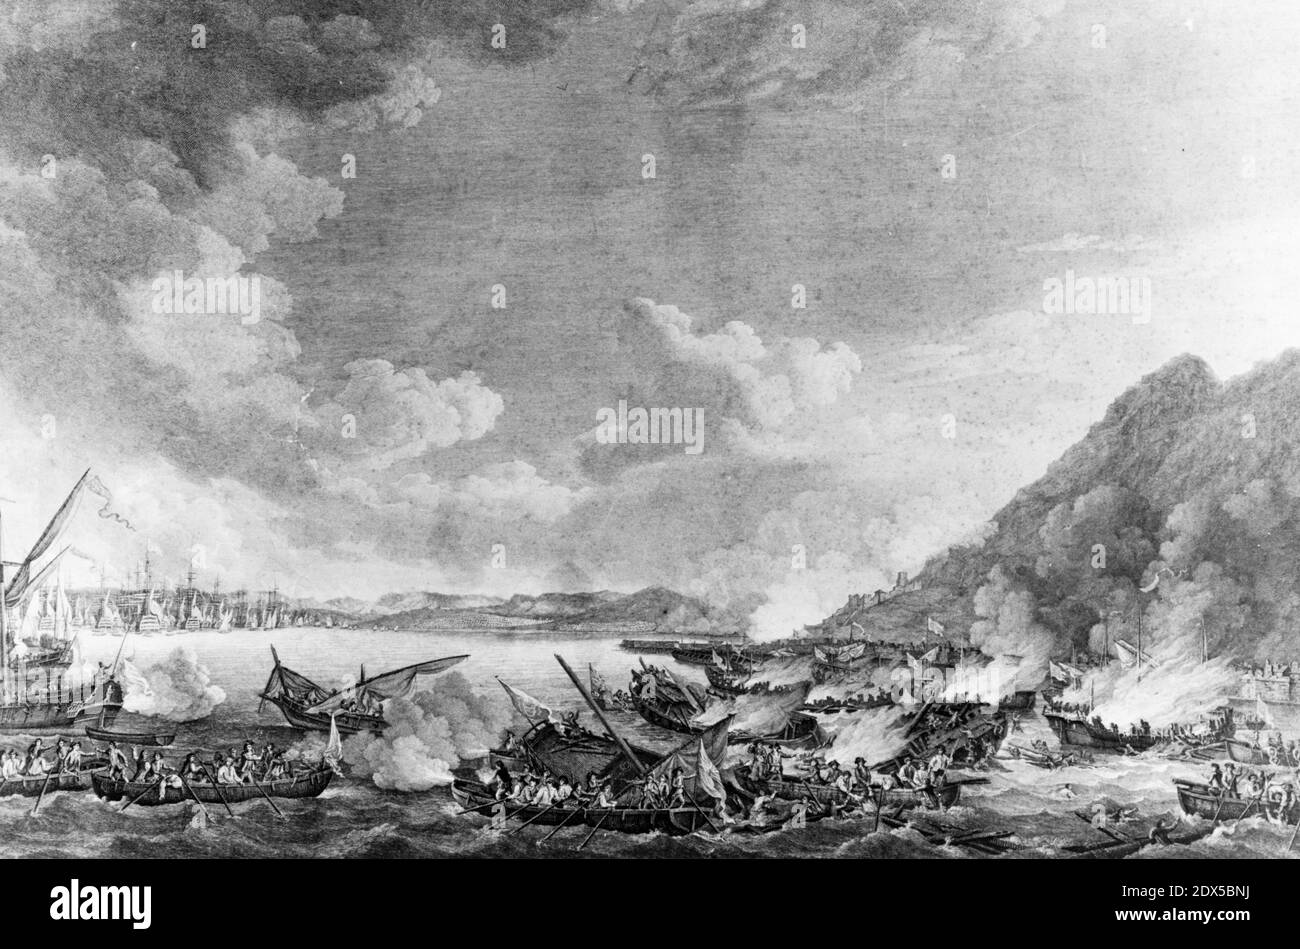 Attack on Gibraltar, September 1782: Engraving by James Fittler after a painting by Richard Paton, published in London, 1 November 1784, depicting the destruction of the Spanish floating batteries by British hot-shot and boat attacks, 14 September 1782. Stock Photo